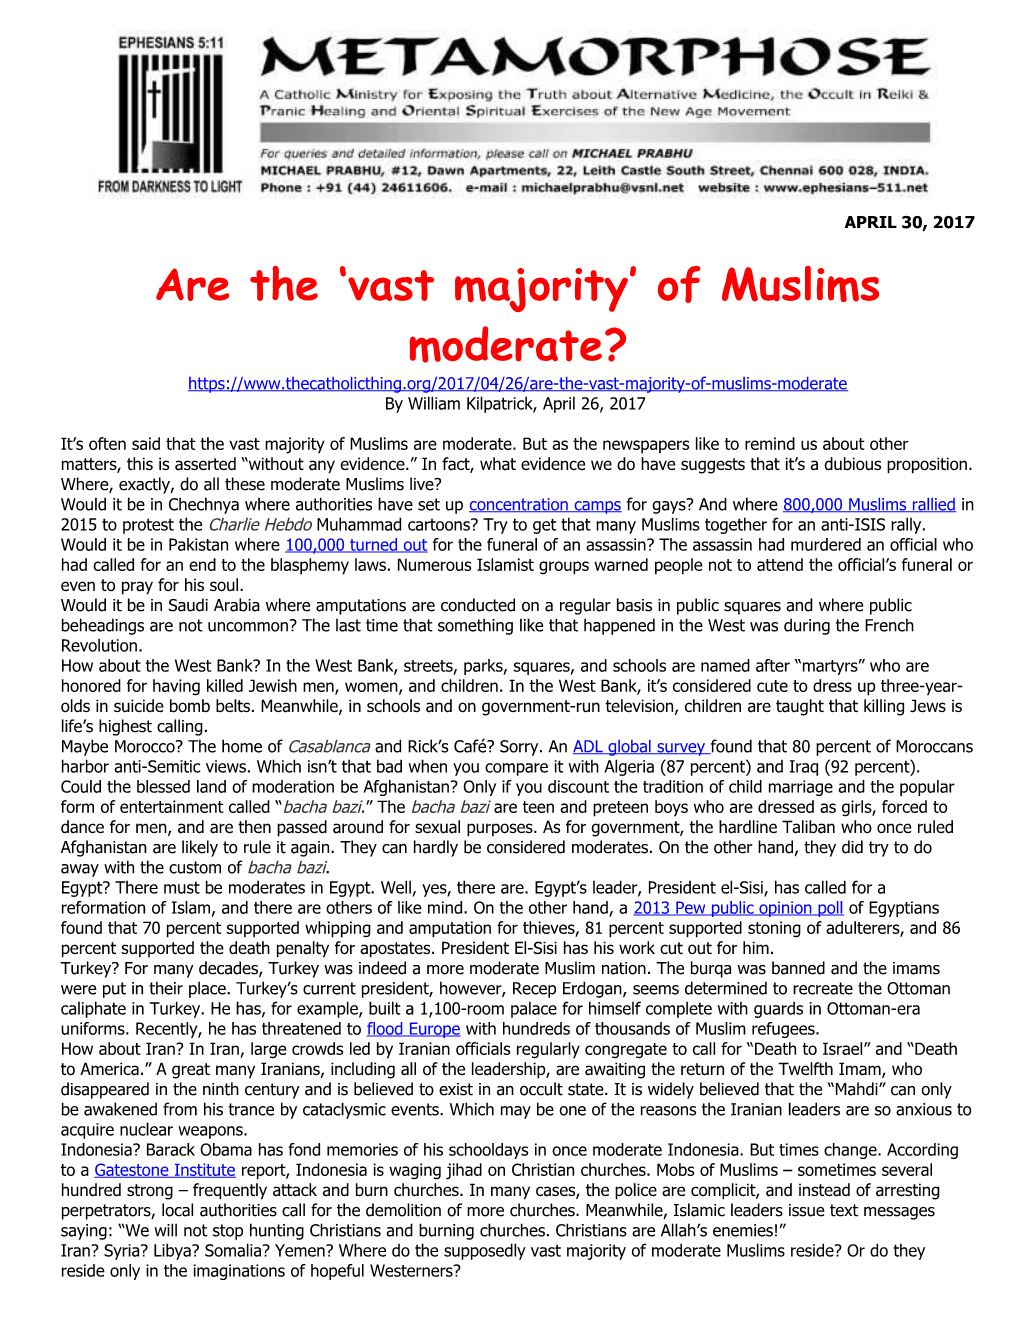 Are the Vast Majority of Muslims Moderate?